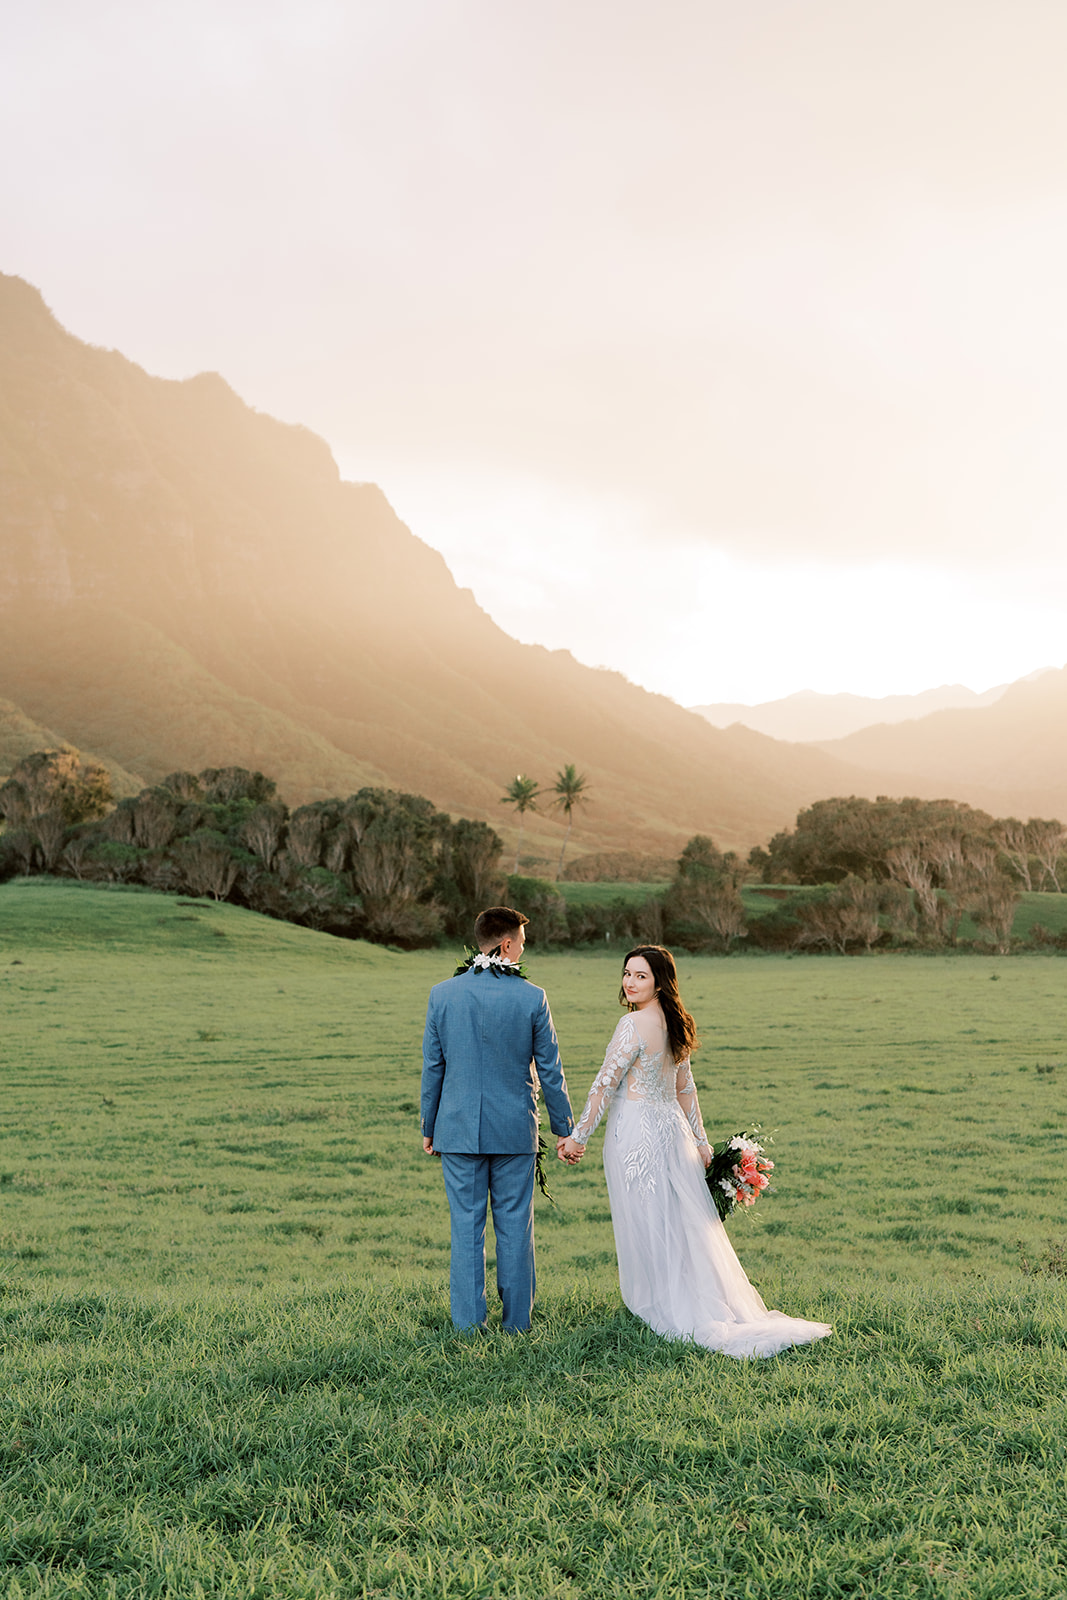 A man and woman holding hands in a field at Kualoa Ranch Wedding, with mountains in the background.